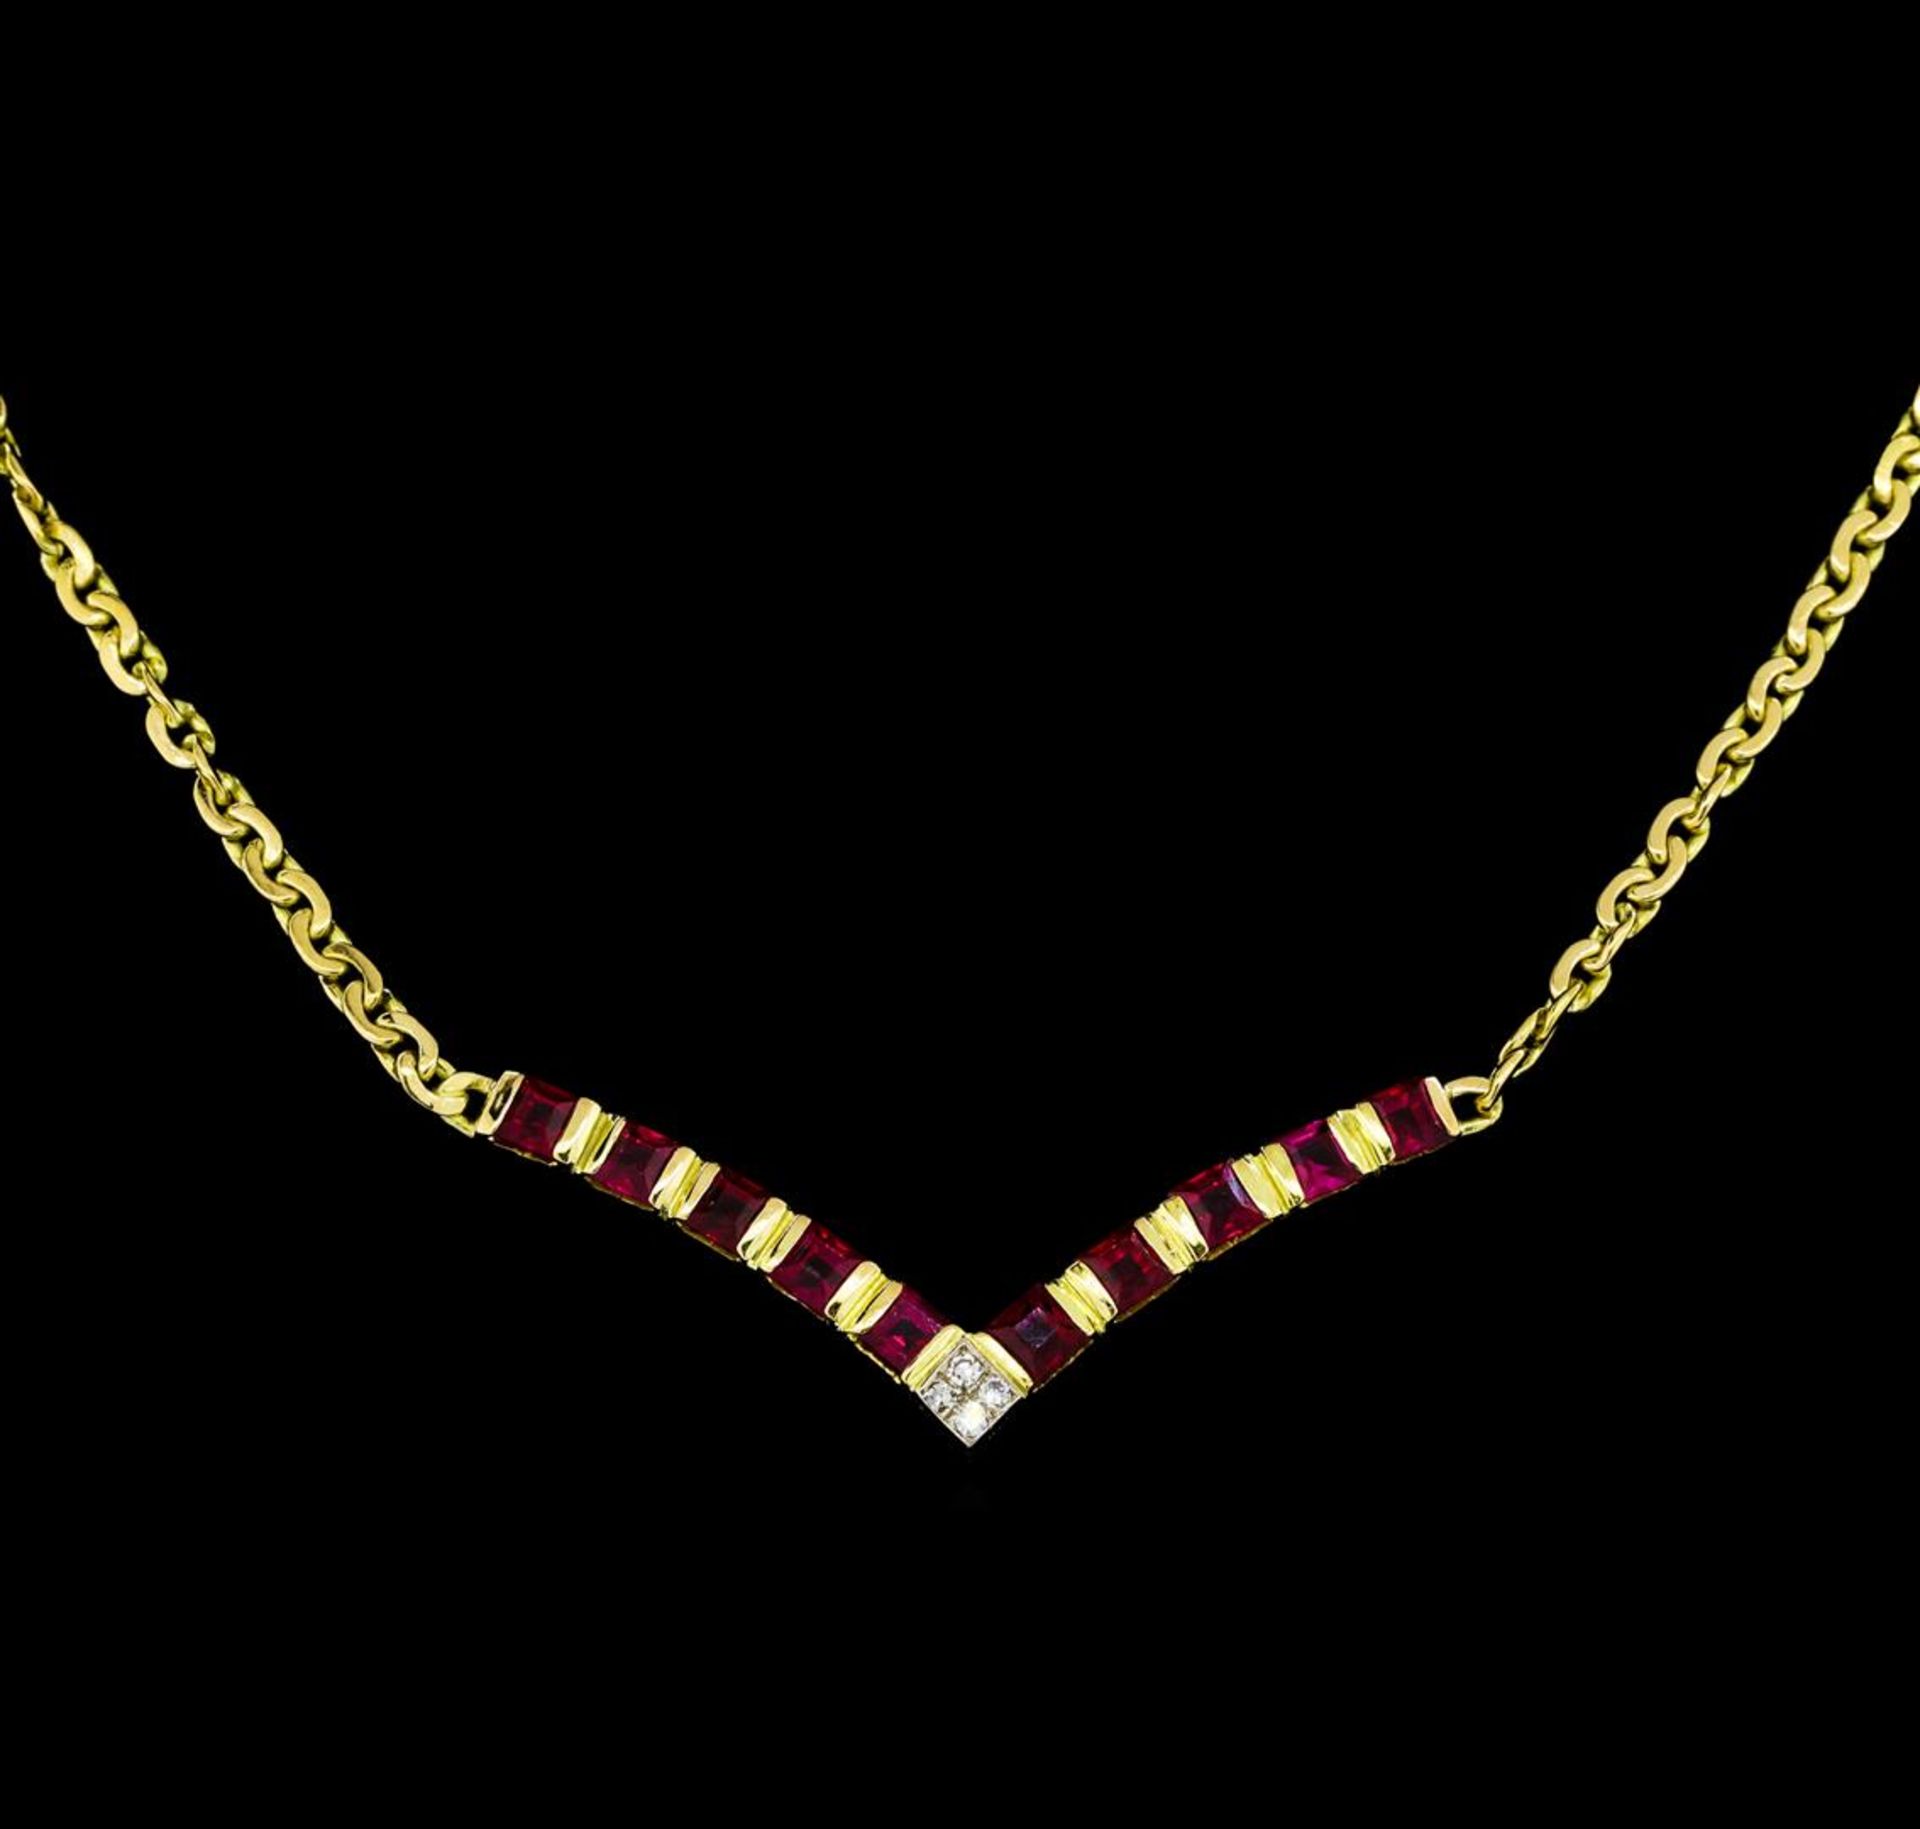 1.70 ctw Ruby and Diamond Necklace - 18KT Yellow Gold - Image 2 of 2